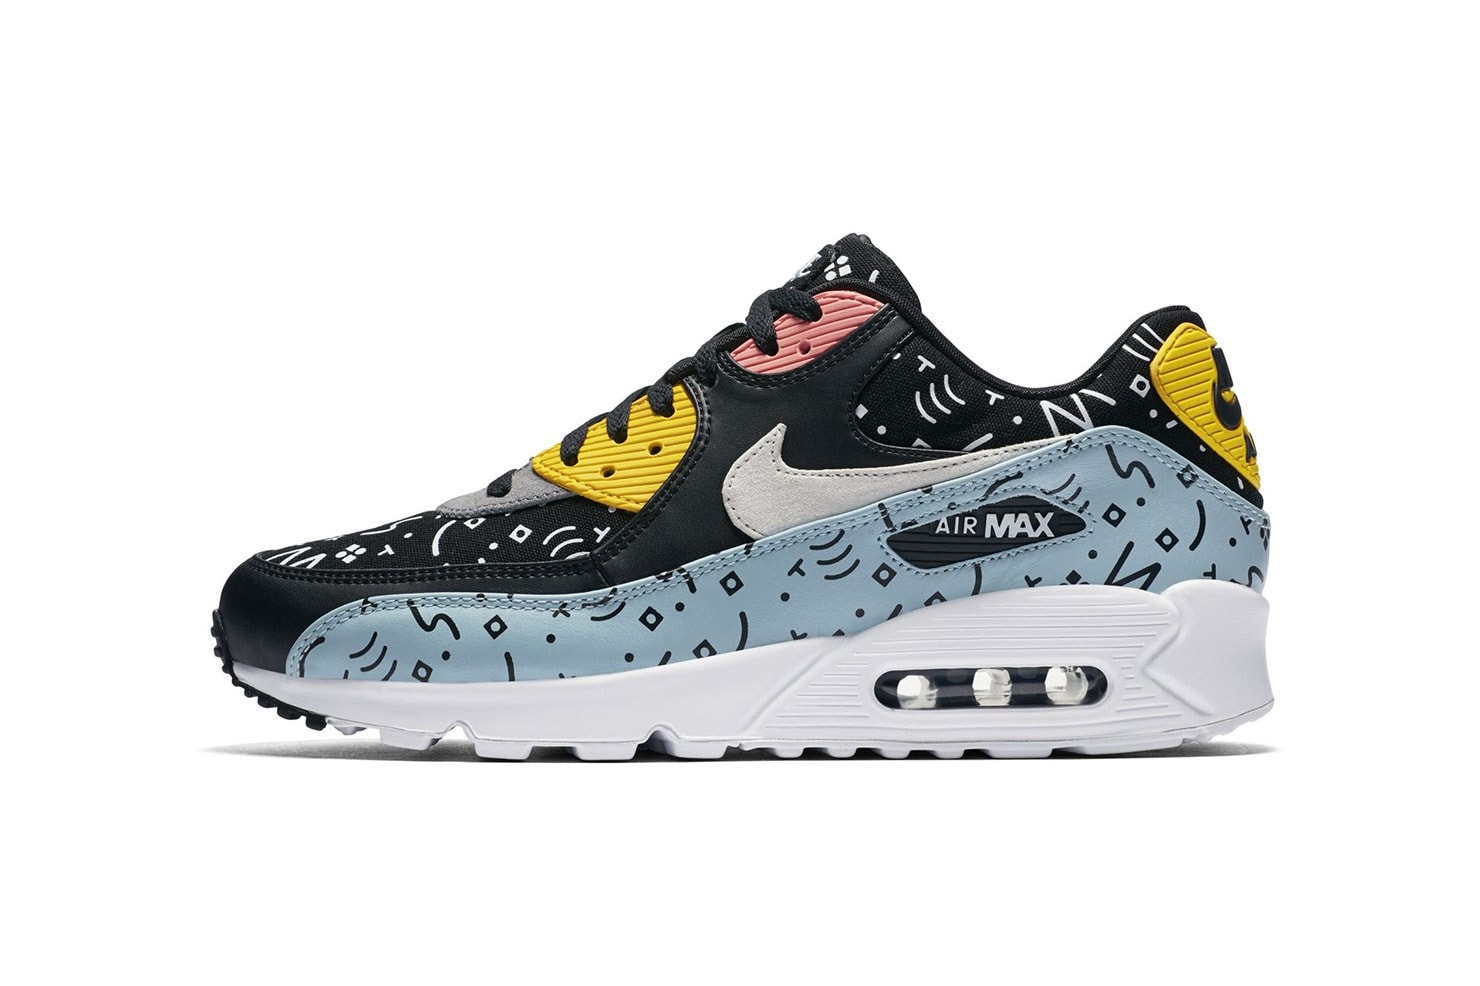 Nike Air Max 90 Premium Graphic Pattern Pack spring summer 2018 release date info sneakers shoes footwear